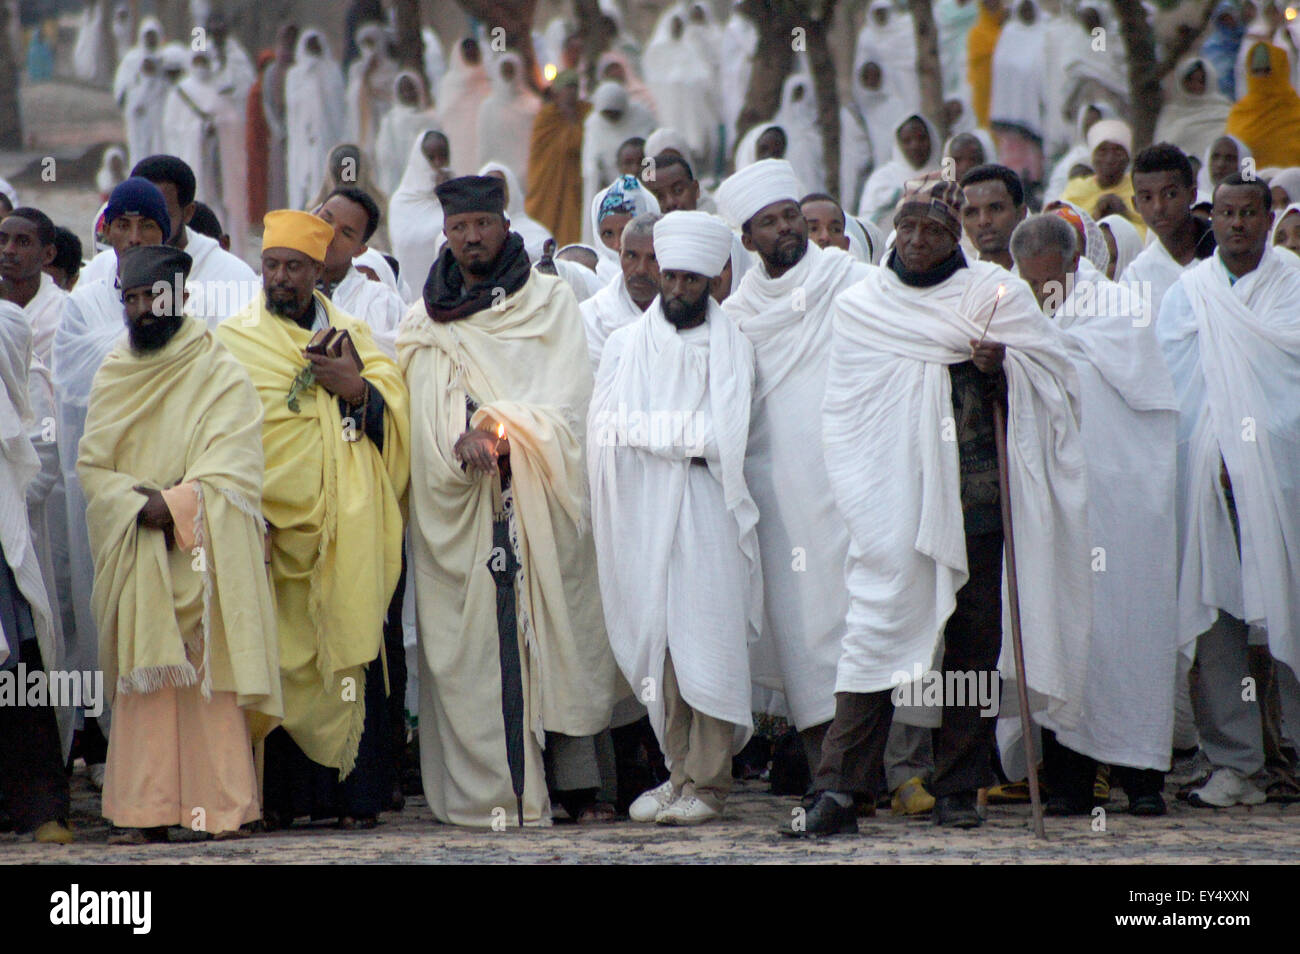 Axum, Ethiopia. 13th July, 2015. Around 1,000 followers attend a ceremony in Axum, Ethiopia, 13 July 2015, during which a copy of the Tablet (or Tabot) is carried to a chapel. Photo: Carola Frentzen/dpa/Alamy Live News Stock Photo